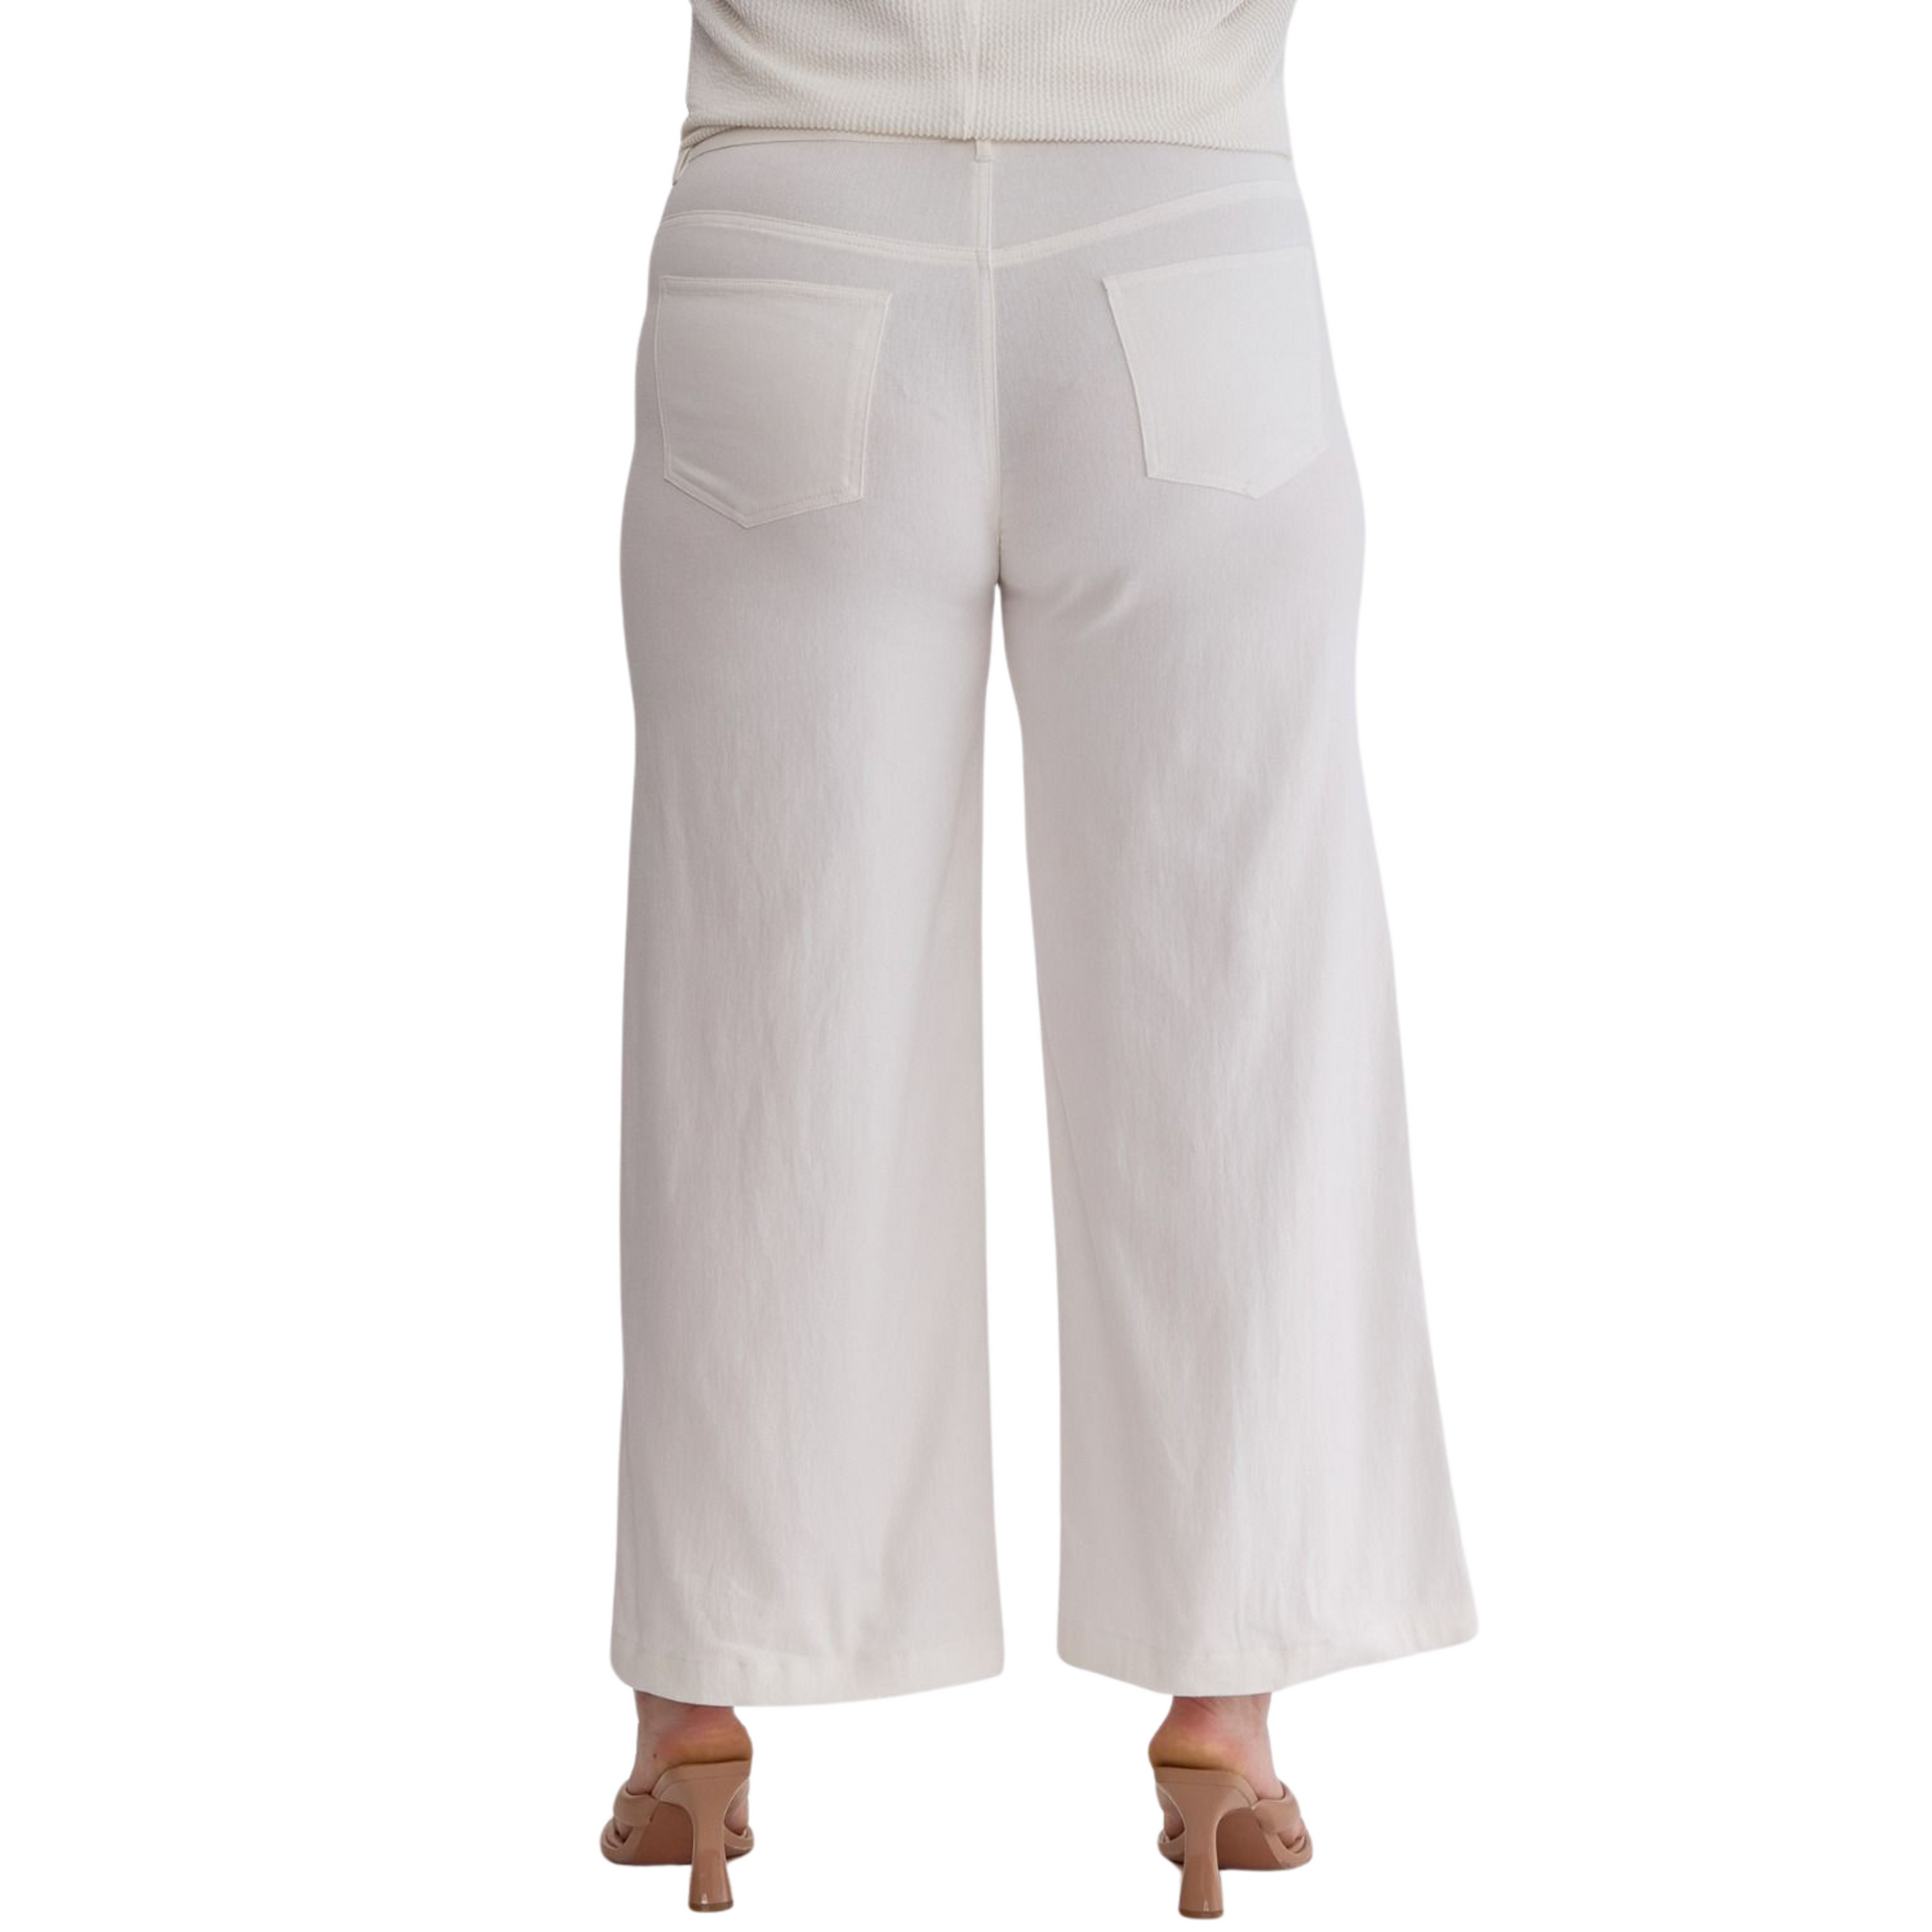 Expertly crafted and stylish, the High Waist Wide Leg Pants are a versatile addition to your wardrobe. With a flattering acid wash and high waist design, these pants feature a zipper front closure for a secure fit and convenient pockets at the side and back. Made with lightweight, non-sheer fabric, these pants are perfect for any occasion. Available in plus size and classic white.